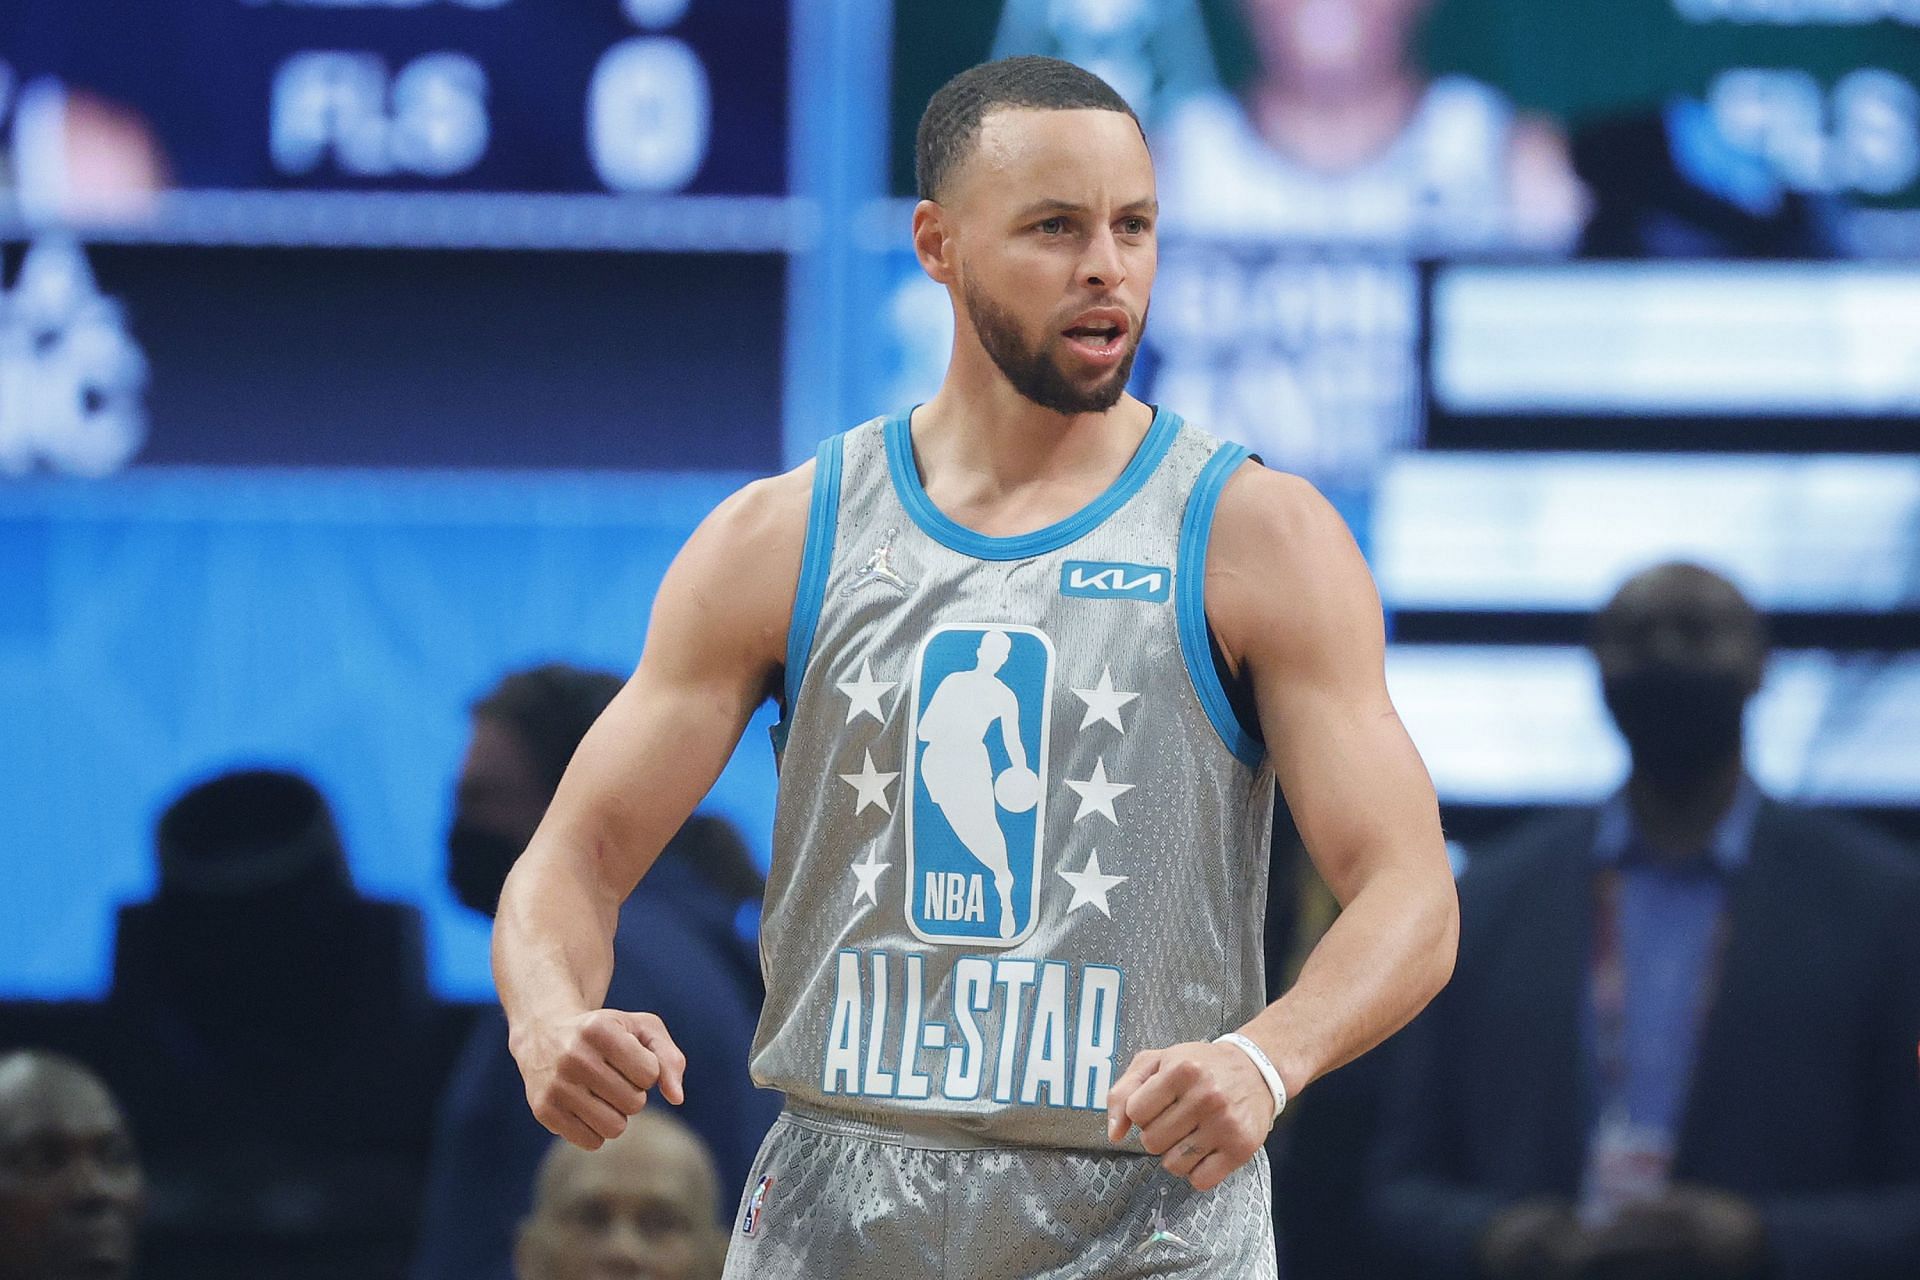 Steph Curry at the 2022 NBA All-Star Game